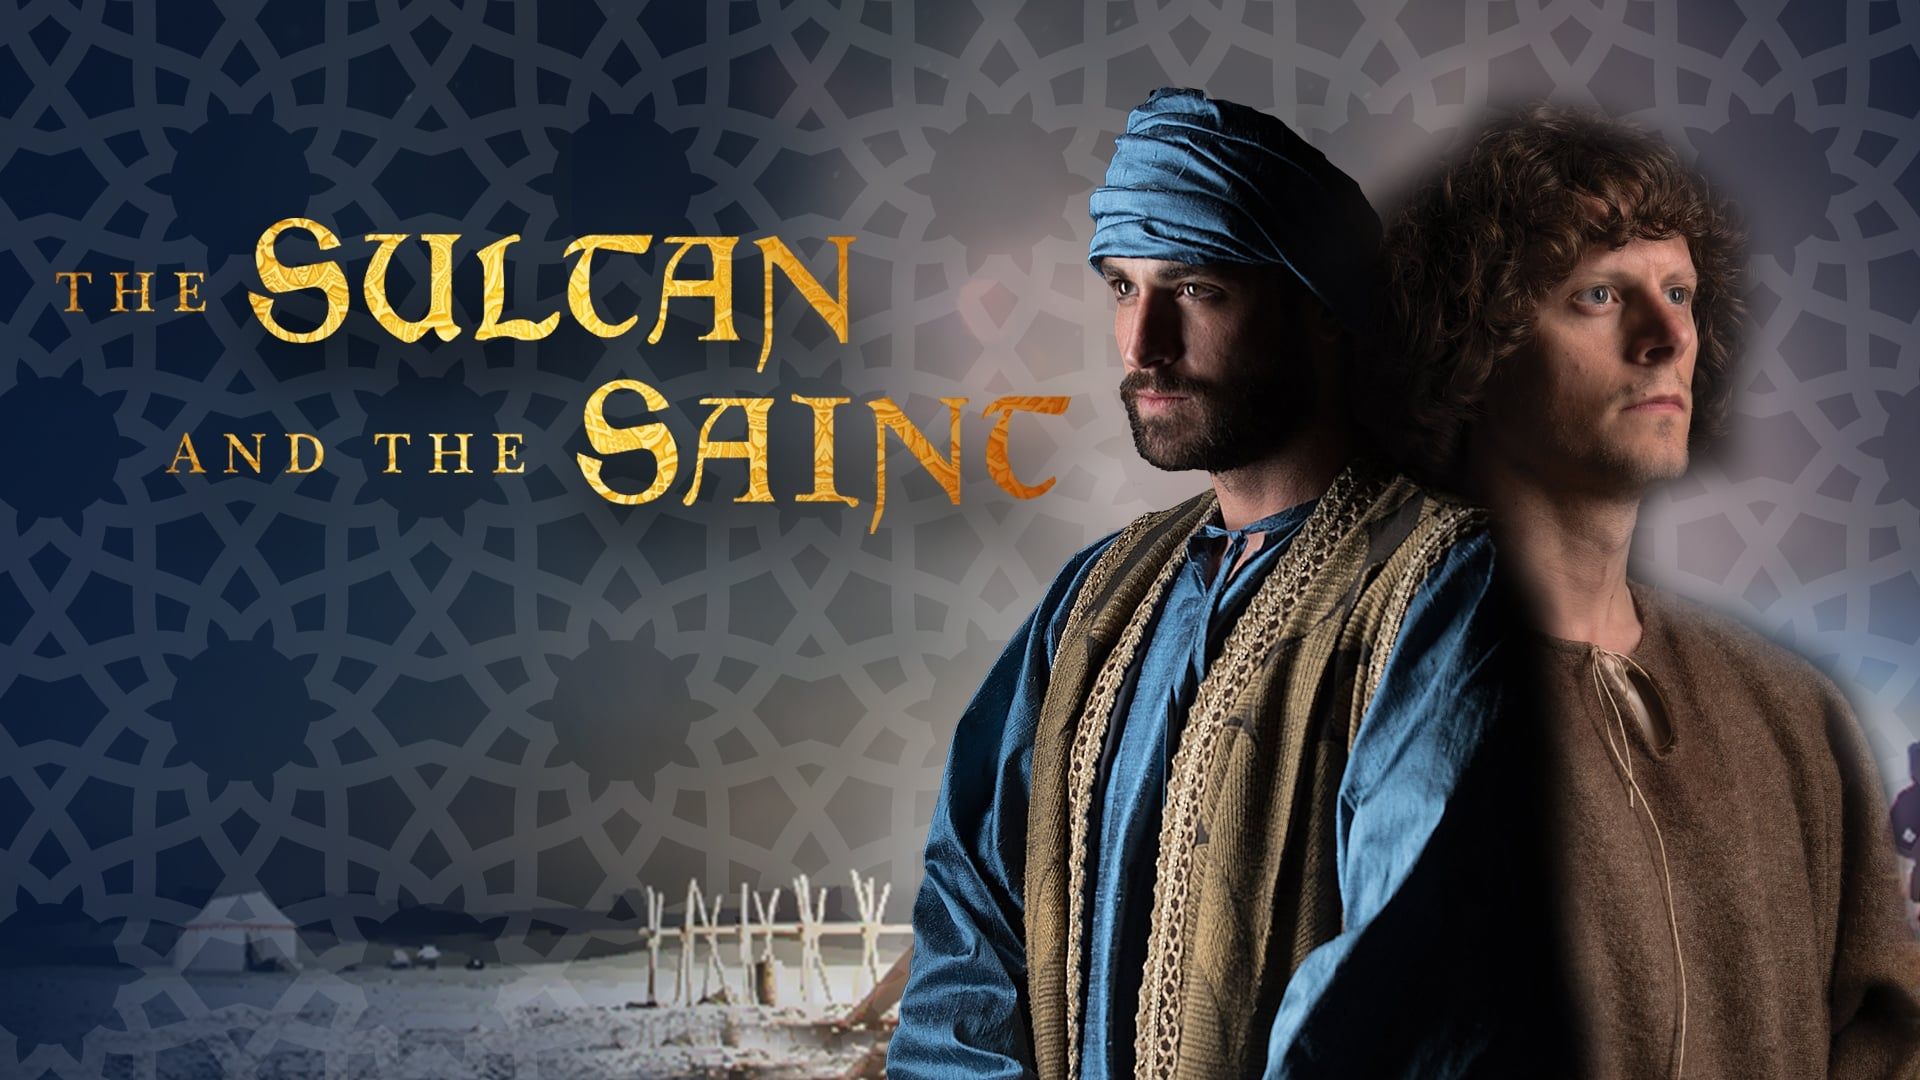 The Sultan and the Saint background